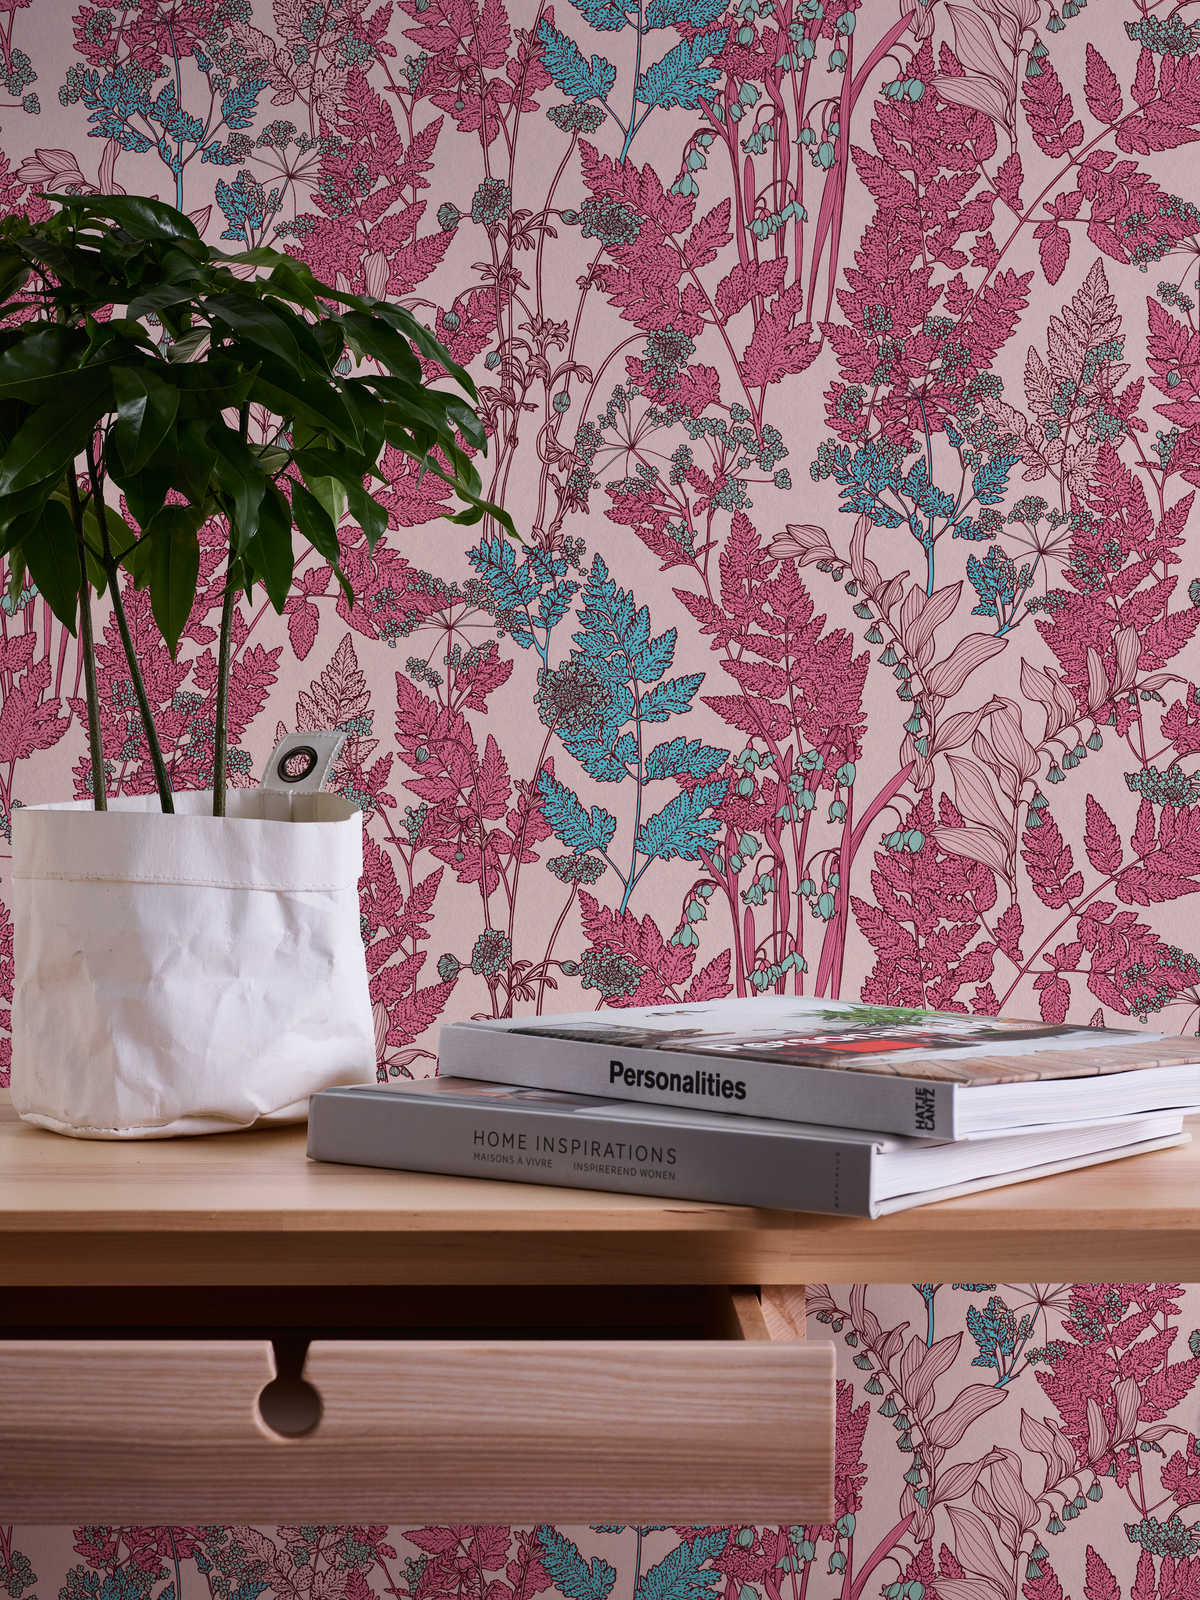             Pink floral wallpaper with floral design in botanical style - pink, red, blue
        